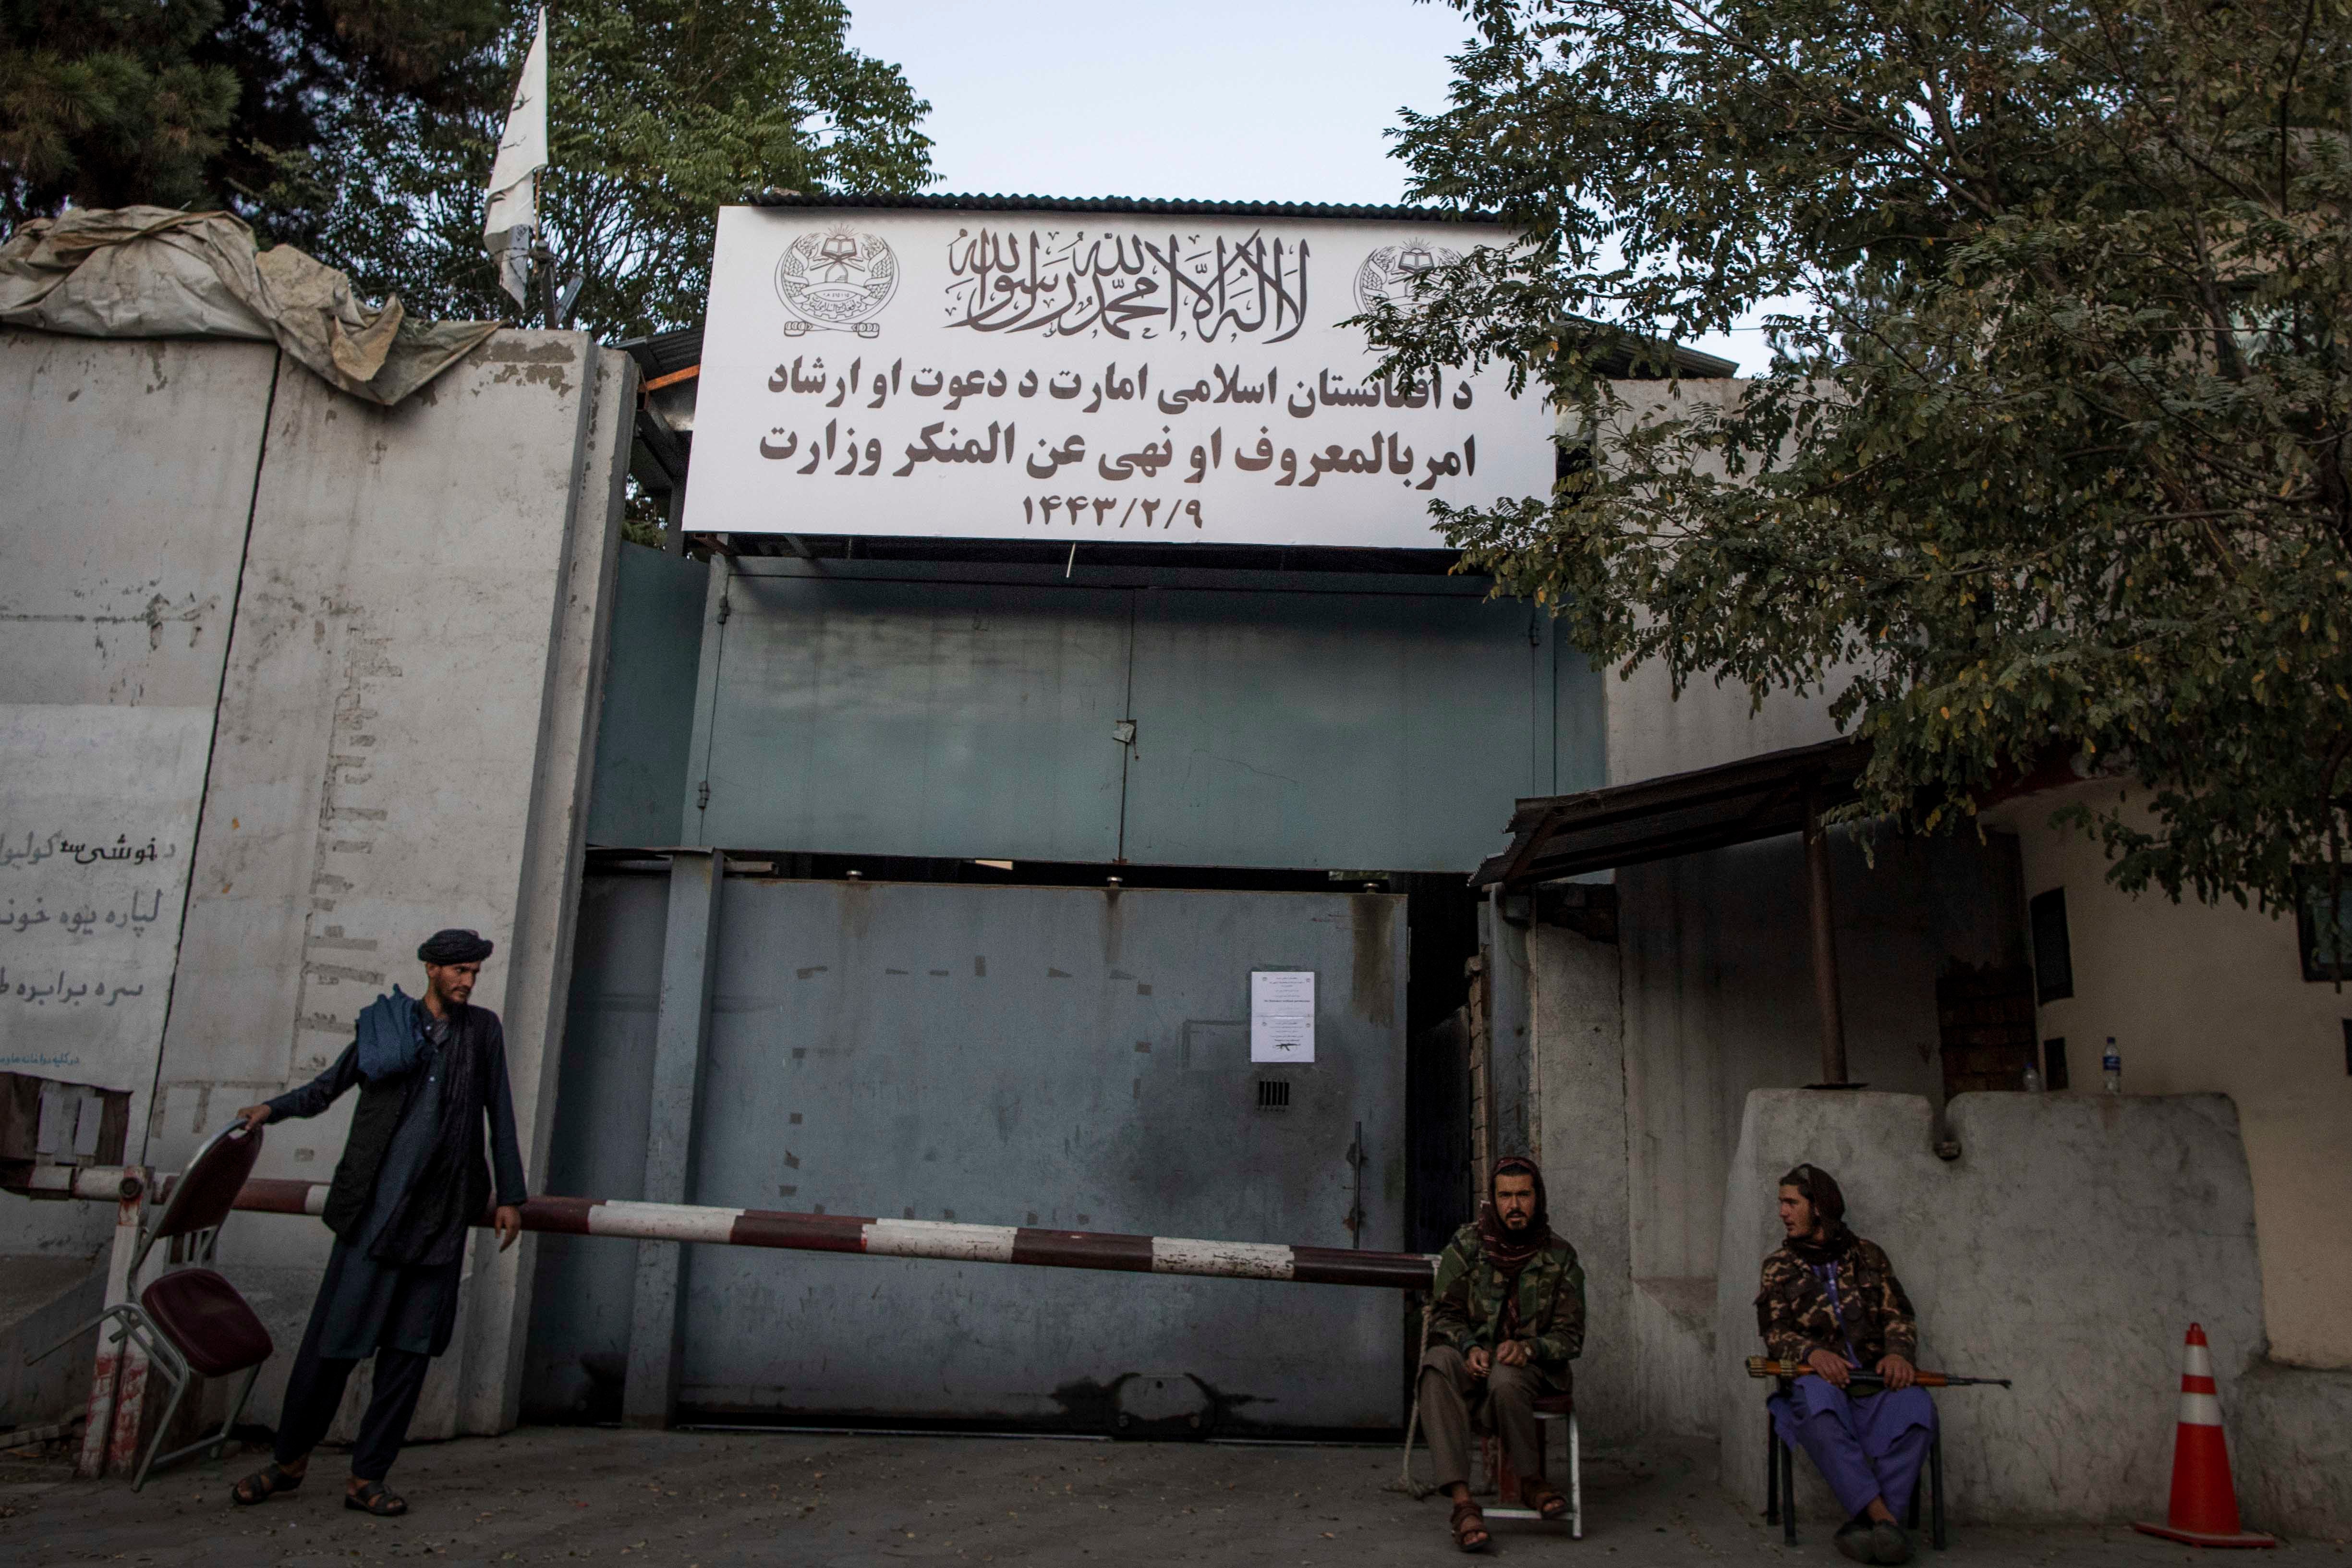 Taliban fighters stand guard at the entrance to the former Ministry of Women Affairs, which the Taliban has replaced with the Ministry of Vice and Virtue, which oversees the implementation of hardline Islamic rules in Afghanistan.